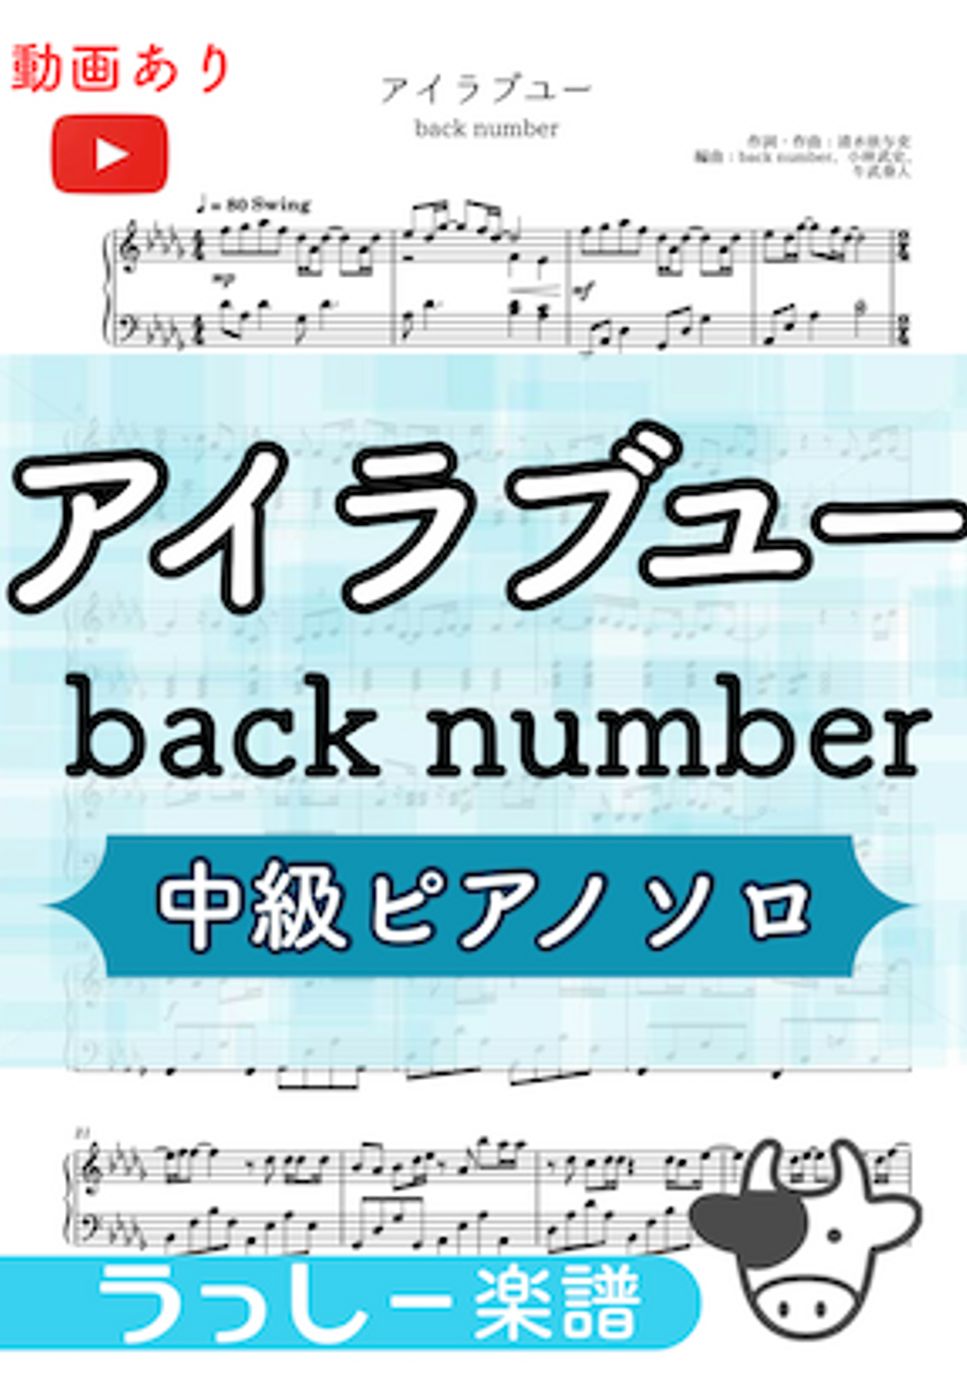 back number - アイラブユー (中級ピアノ) by 牛武奏人